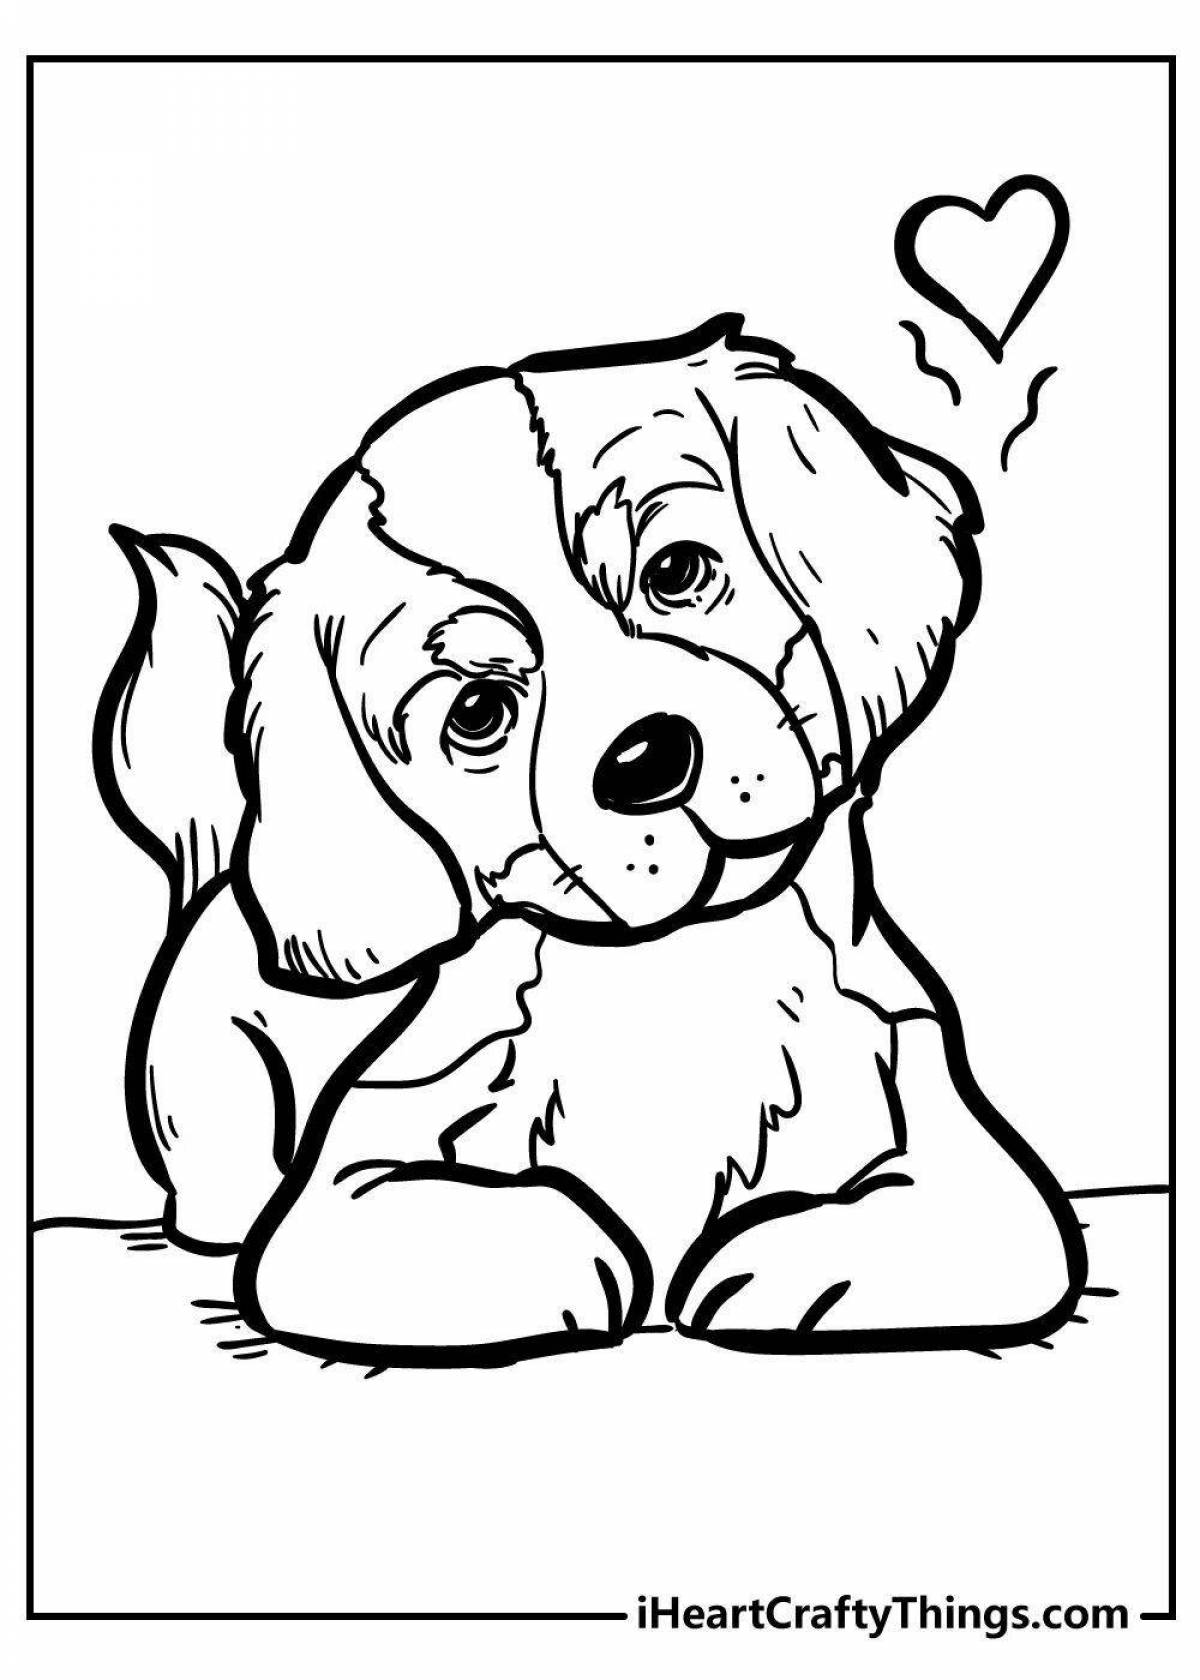 Cute dog coloring book for kids 5-6 years old